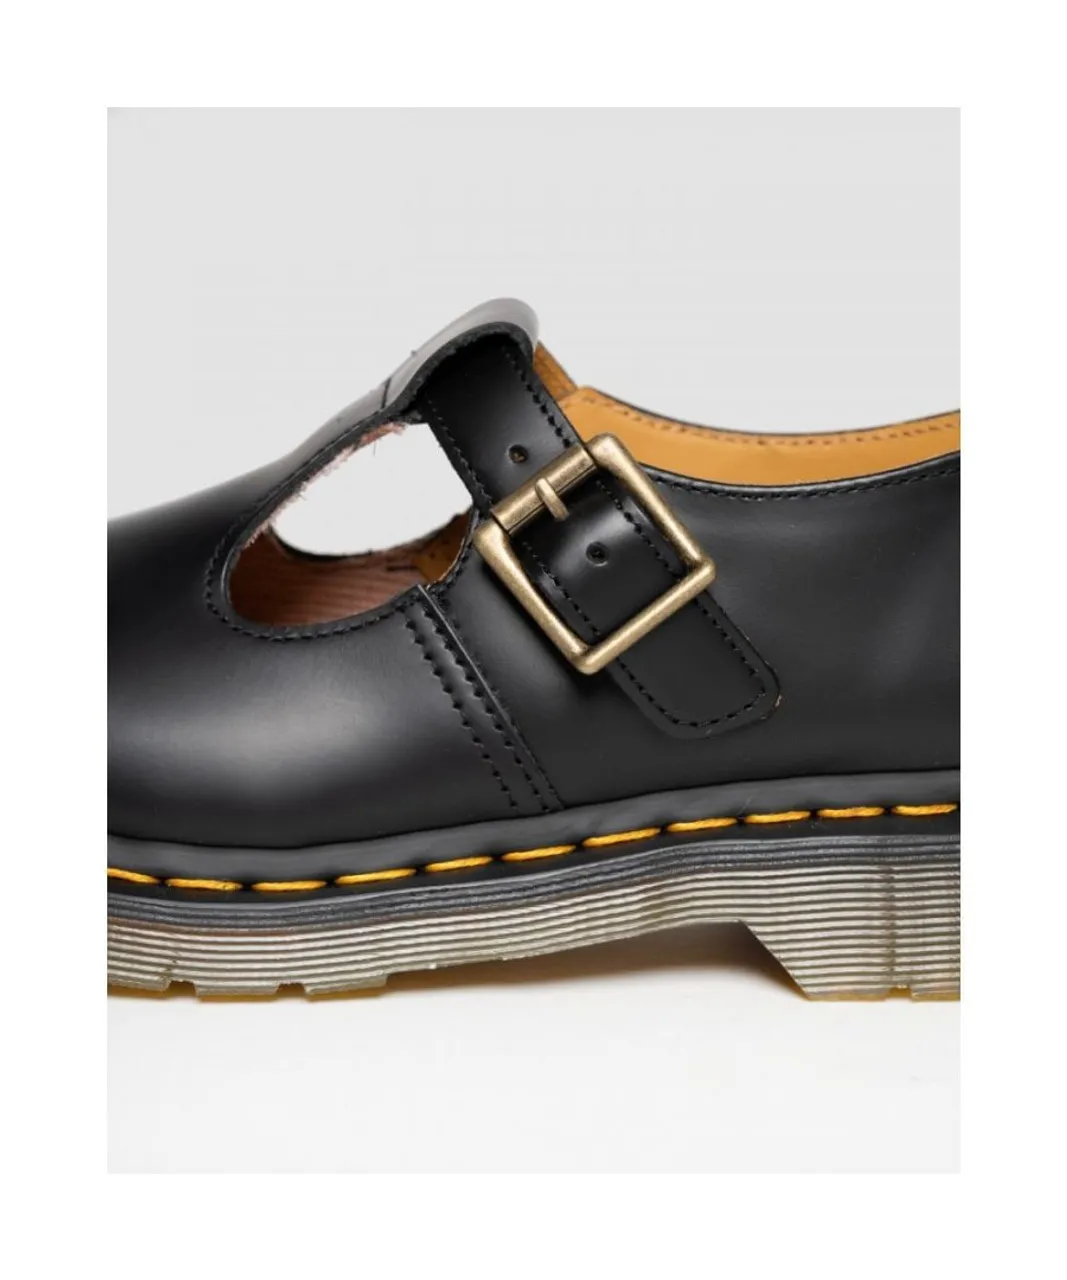 Dr Martens Polley Smooth Womens Mary Jane Shoes - Black